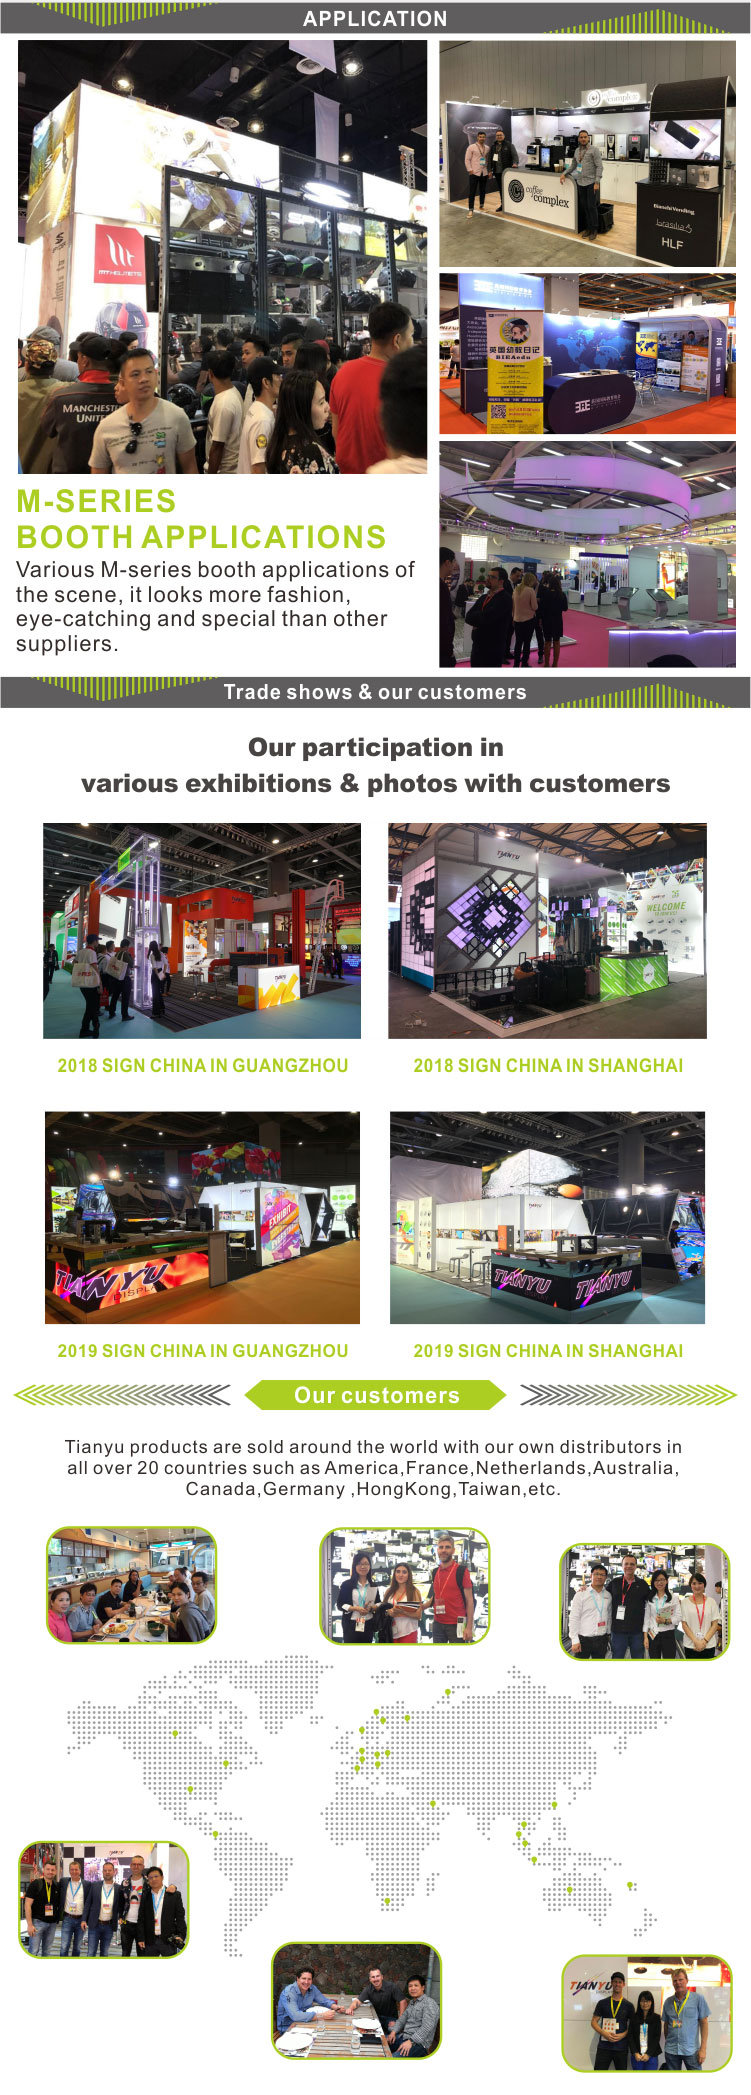 China Recyclable Environmental Protection Modular Exhibition Display Booth Stand